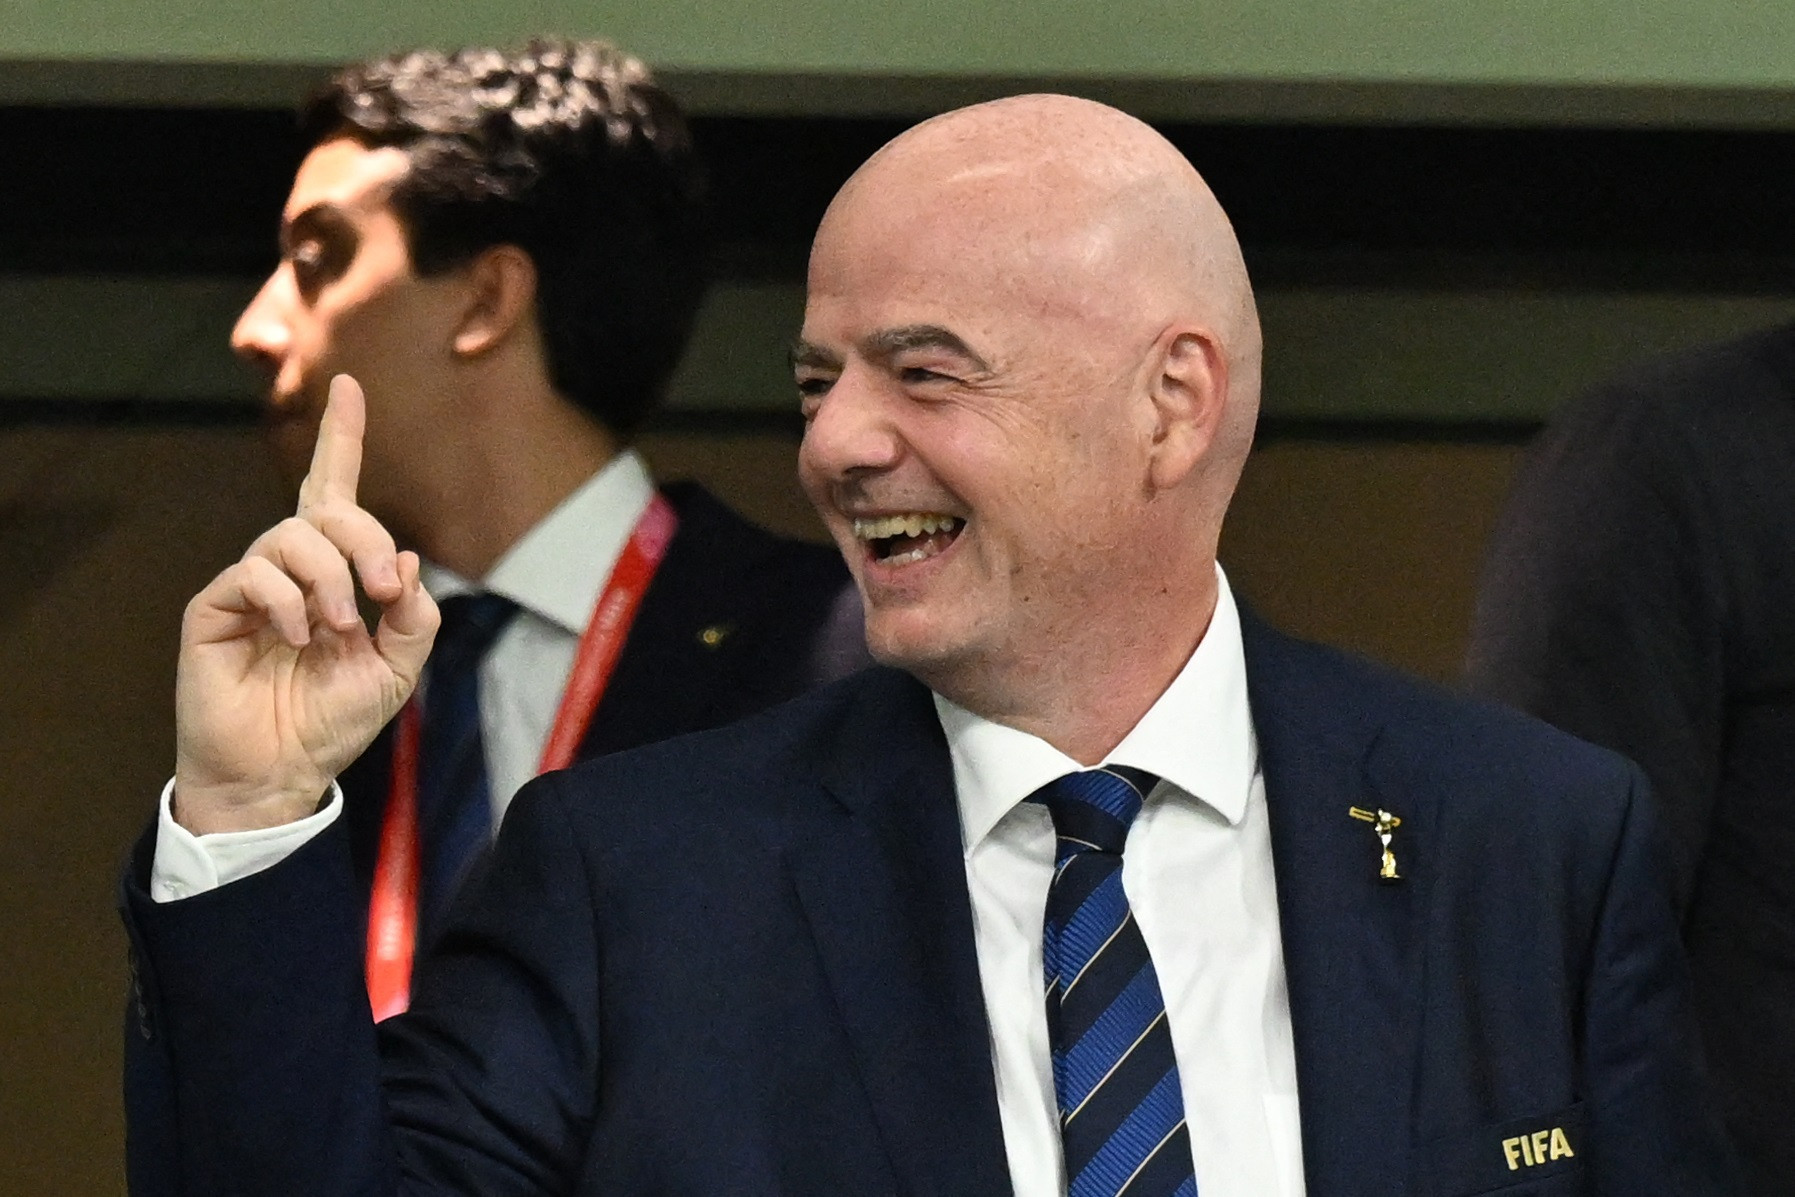 Infantino boasts "FIFA was right" as Women’s World Cup breaks even